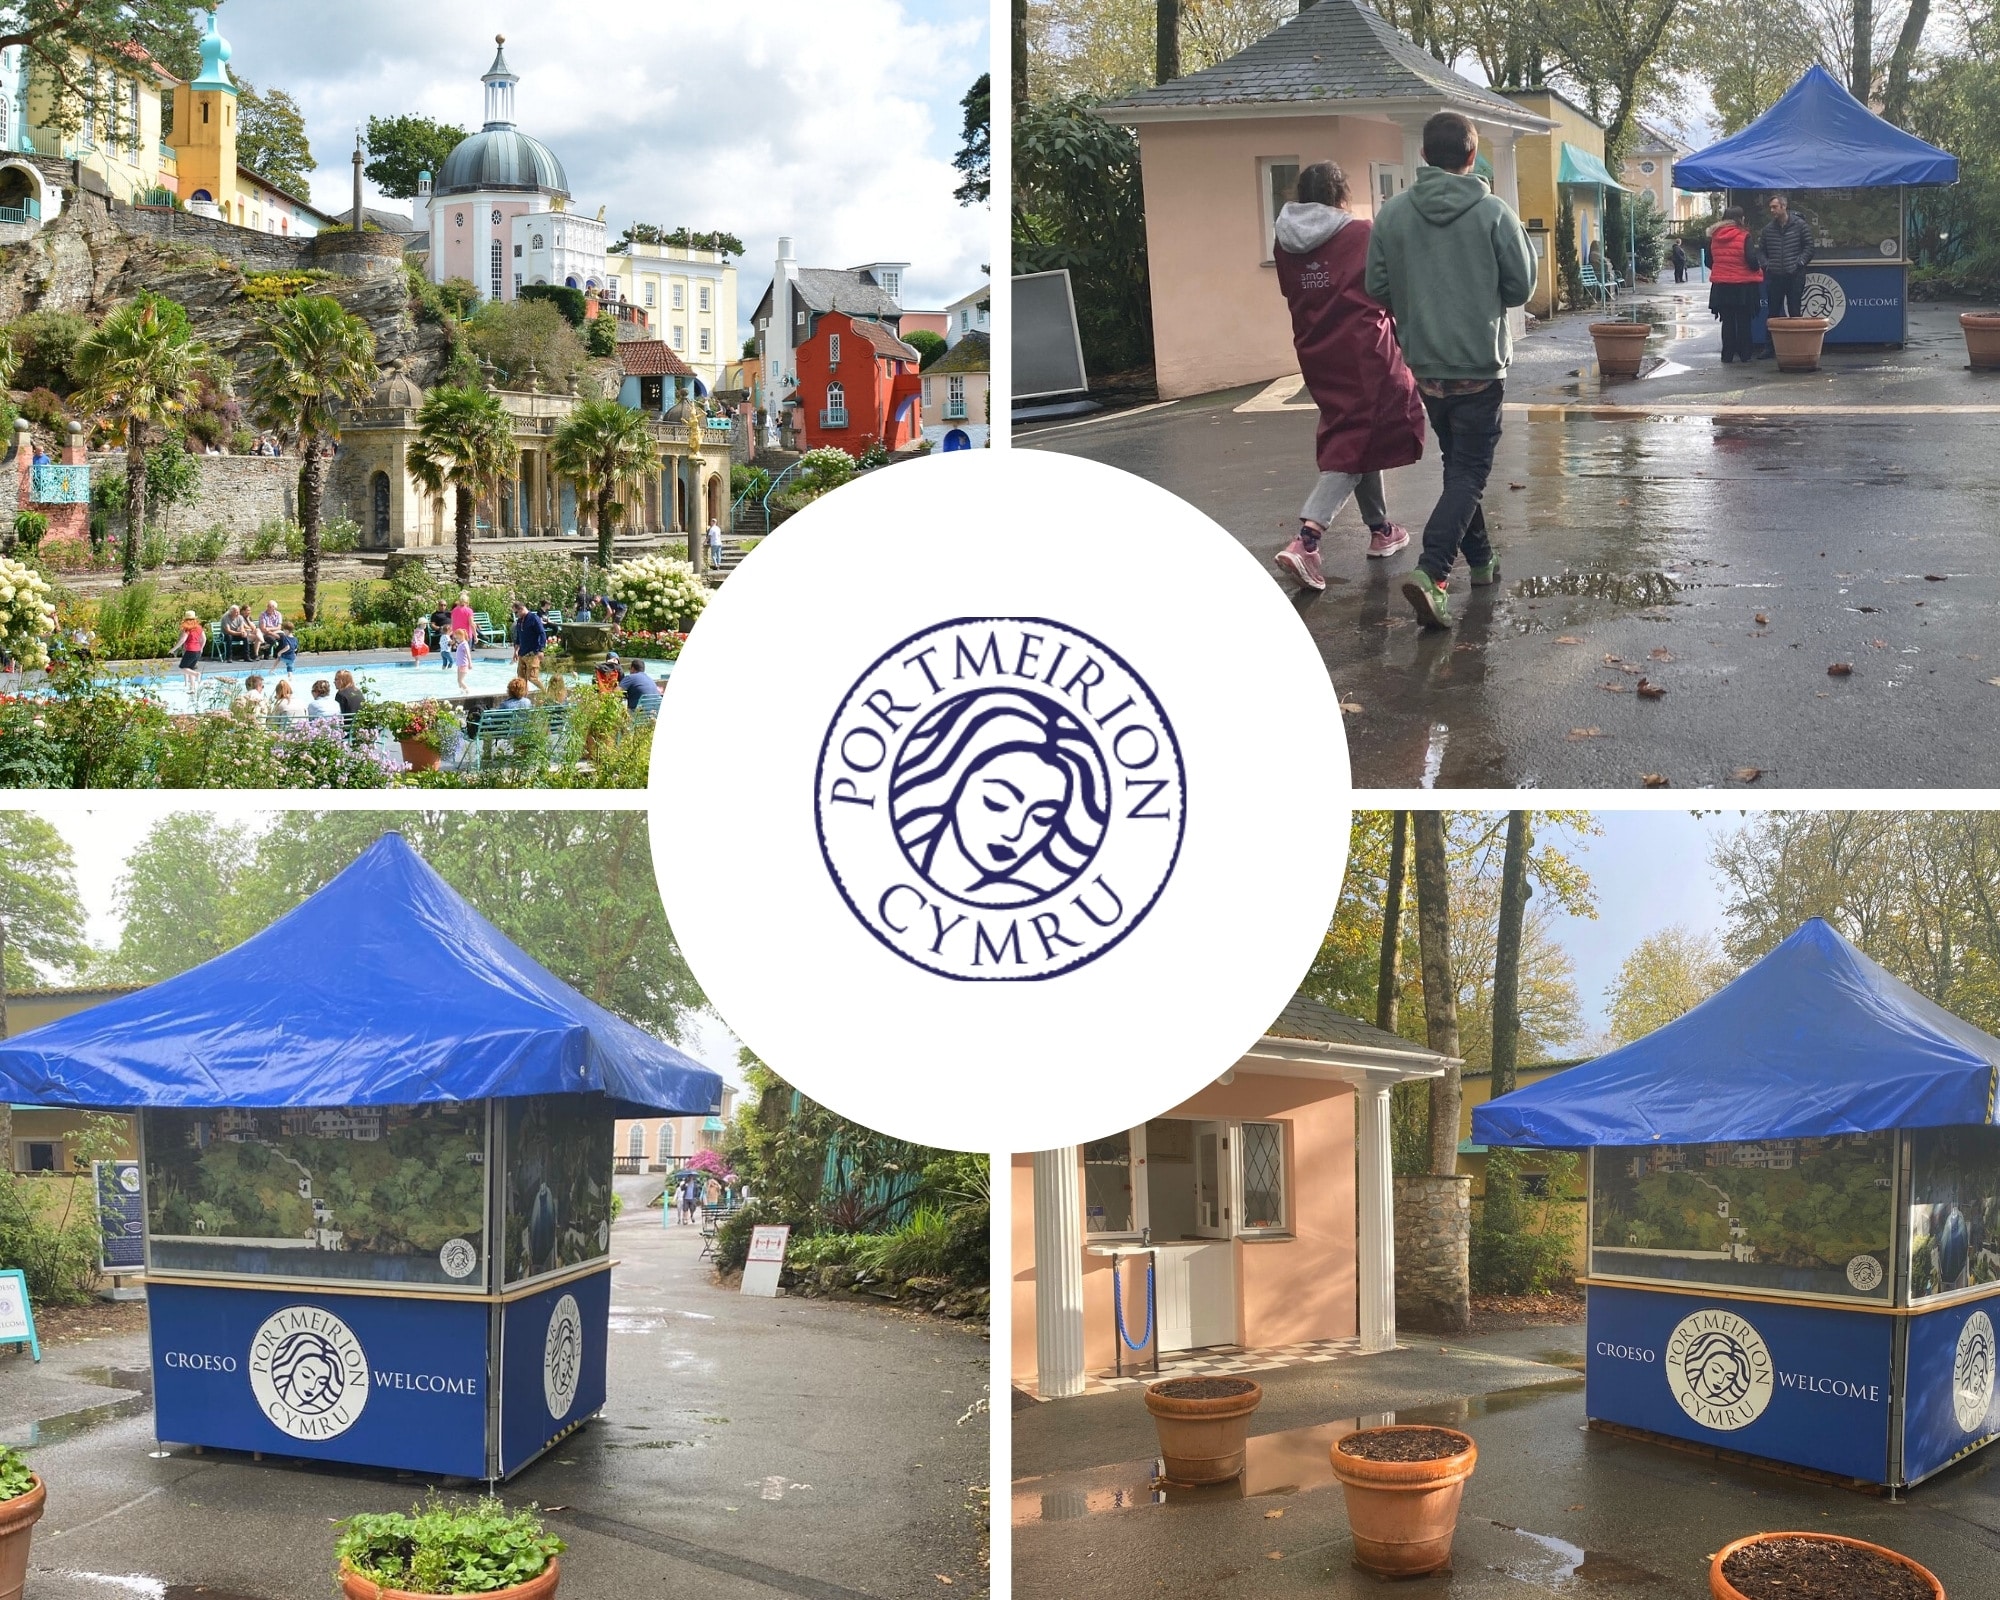 Outdoor Information Kiosk reduces wait time for 300,000 visitors to Portmeirion